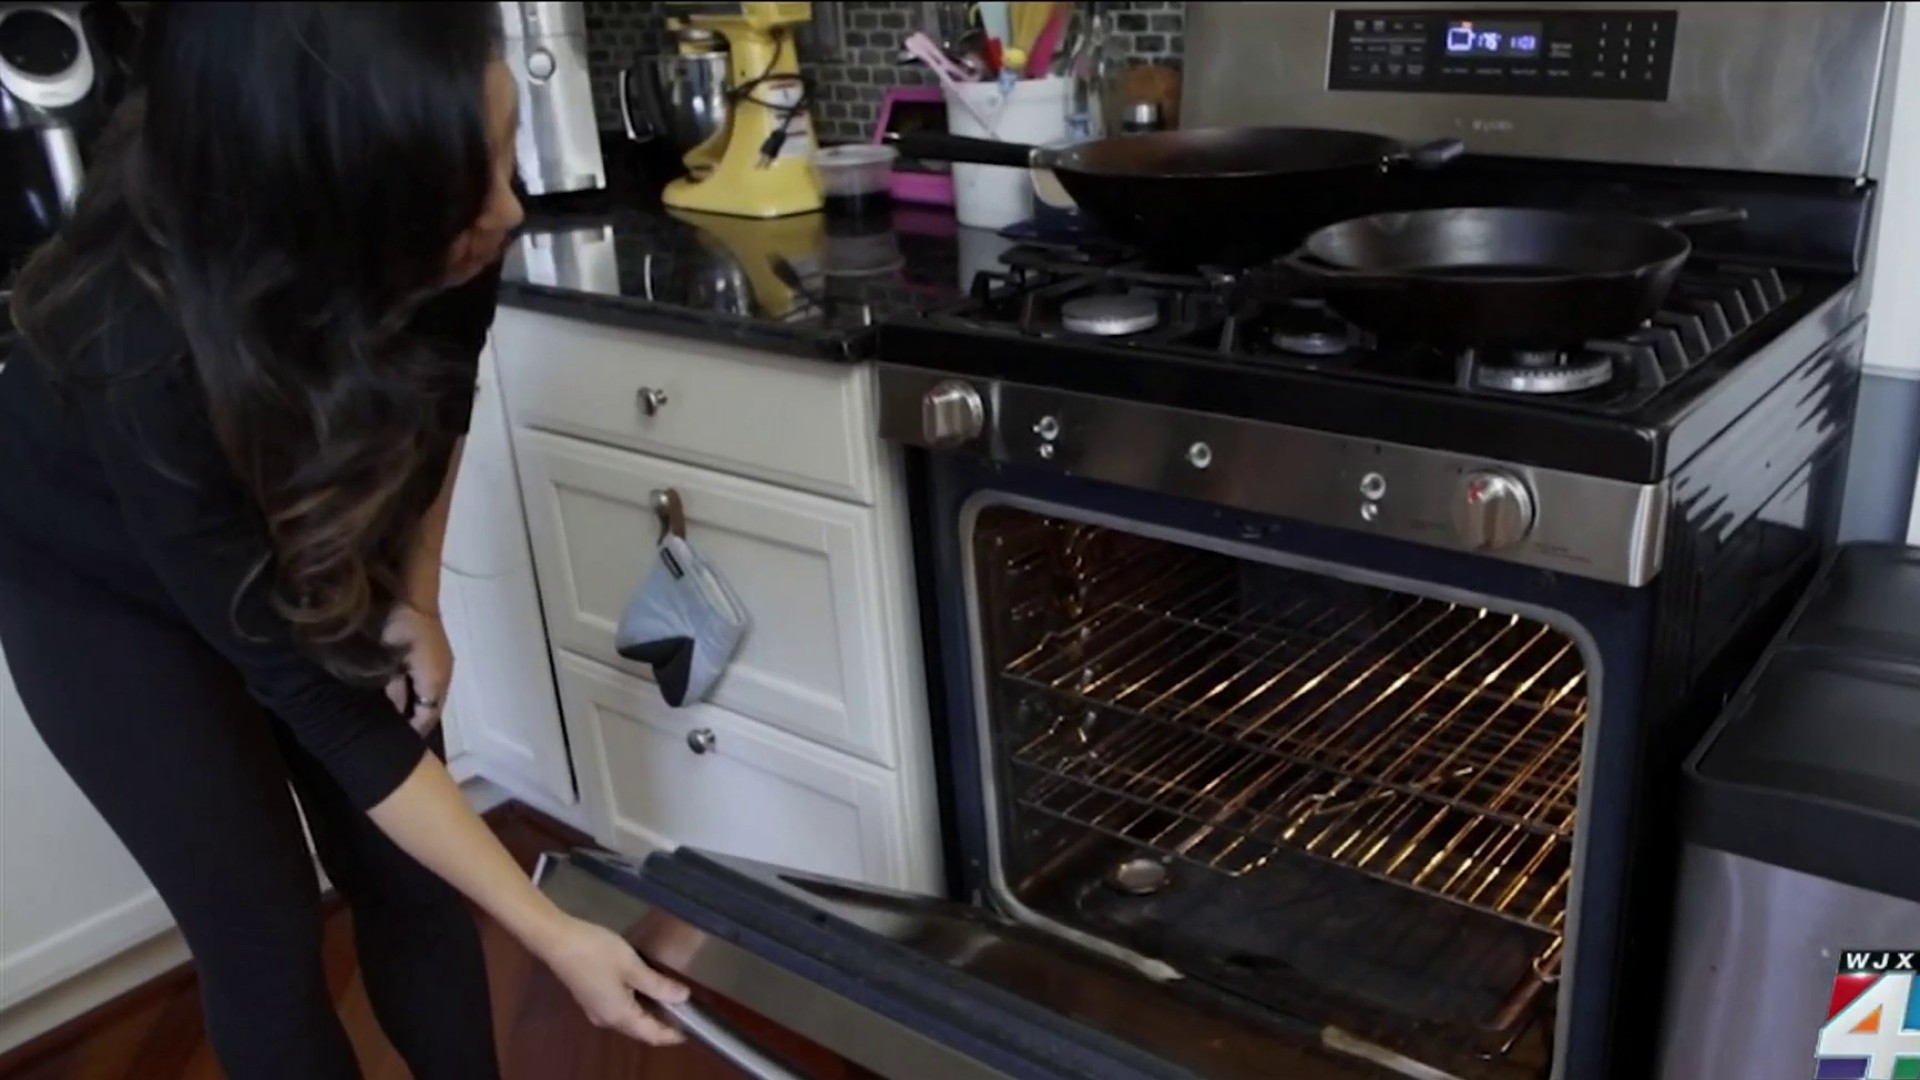 How to check your oven's temperature, and what to do if it runs hot or cold